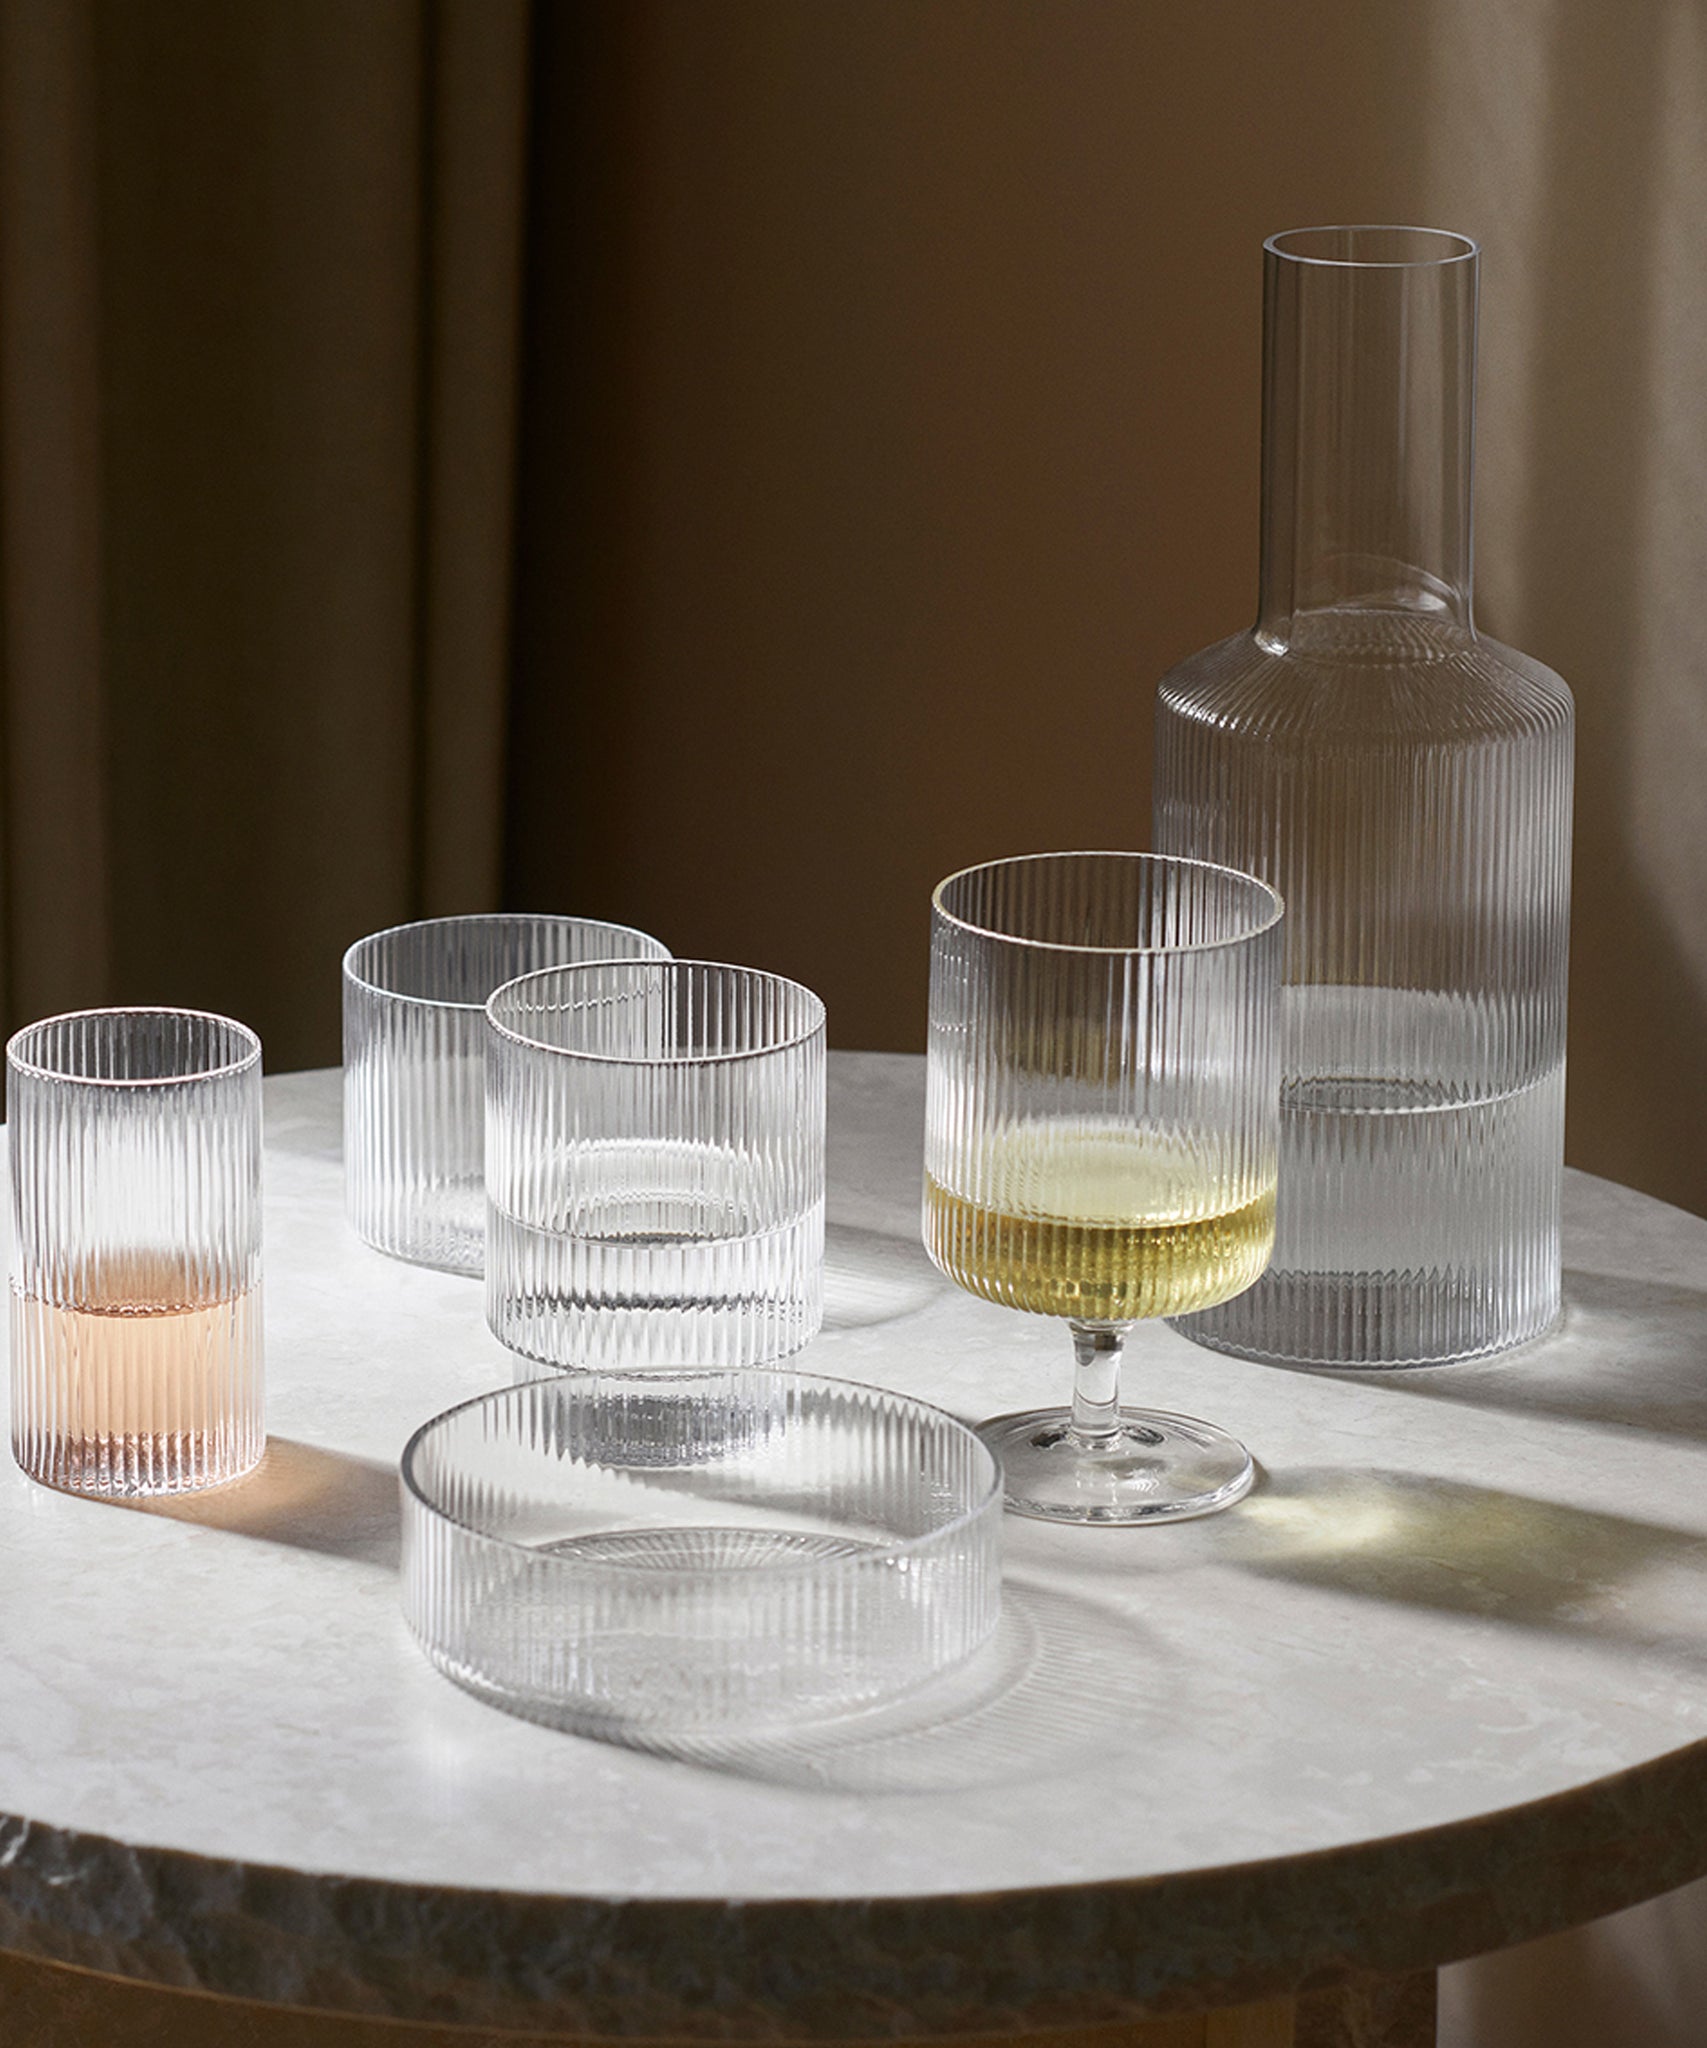 Ripple Carafe Set, Elegant in mouth-blown and ribbed glass